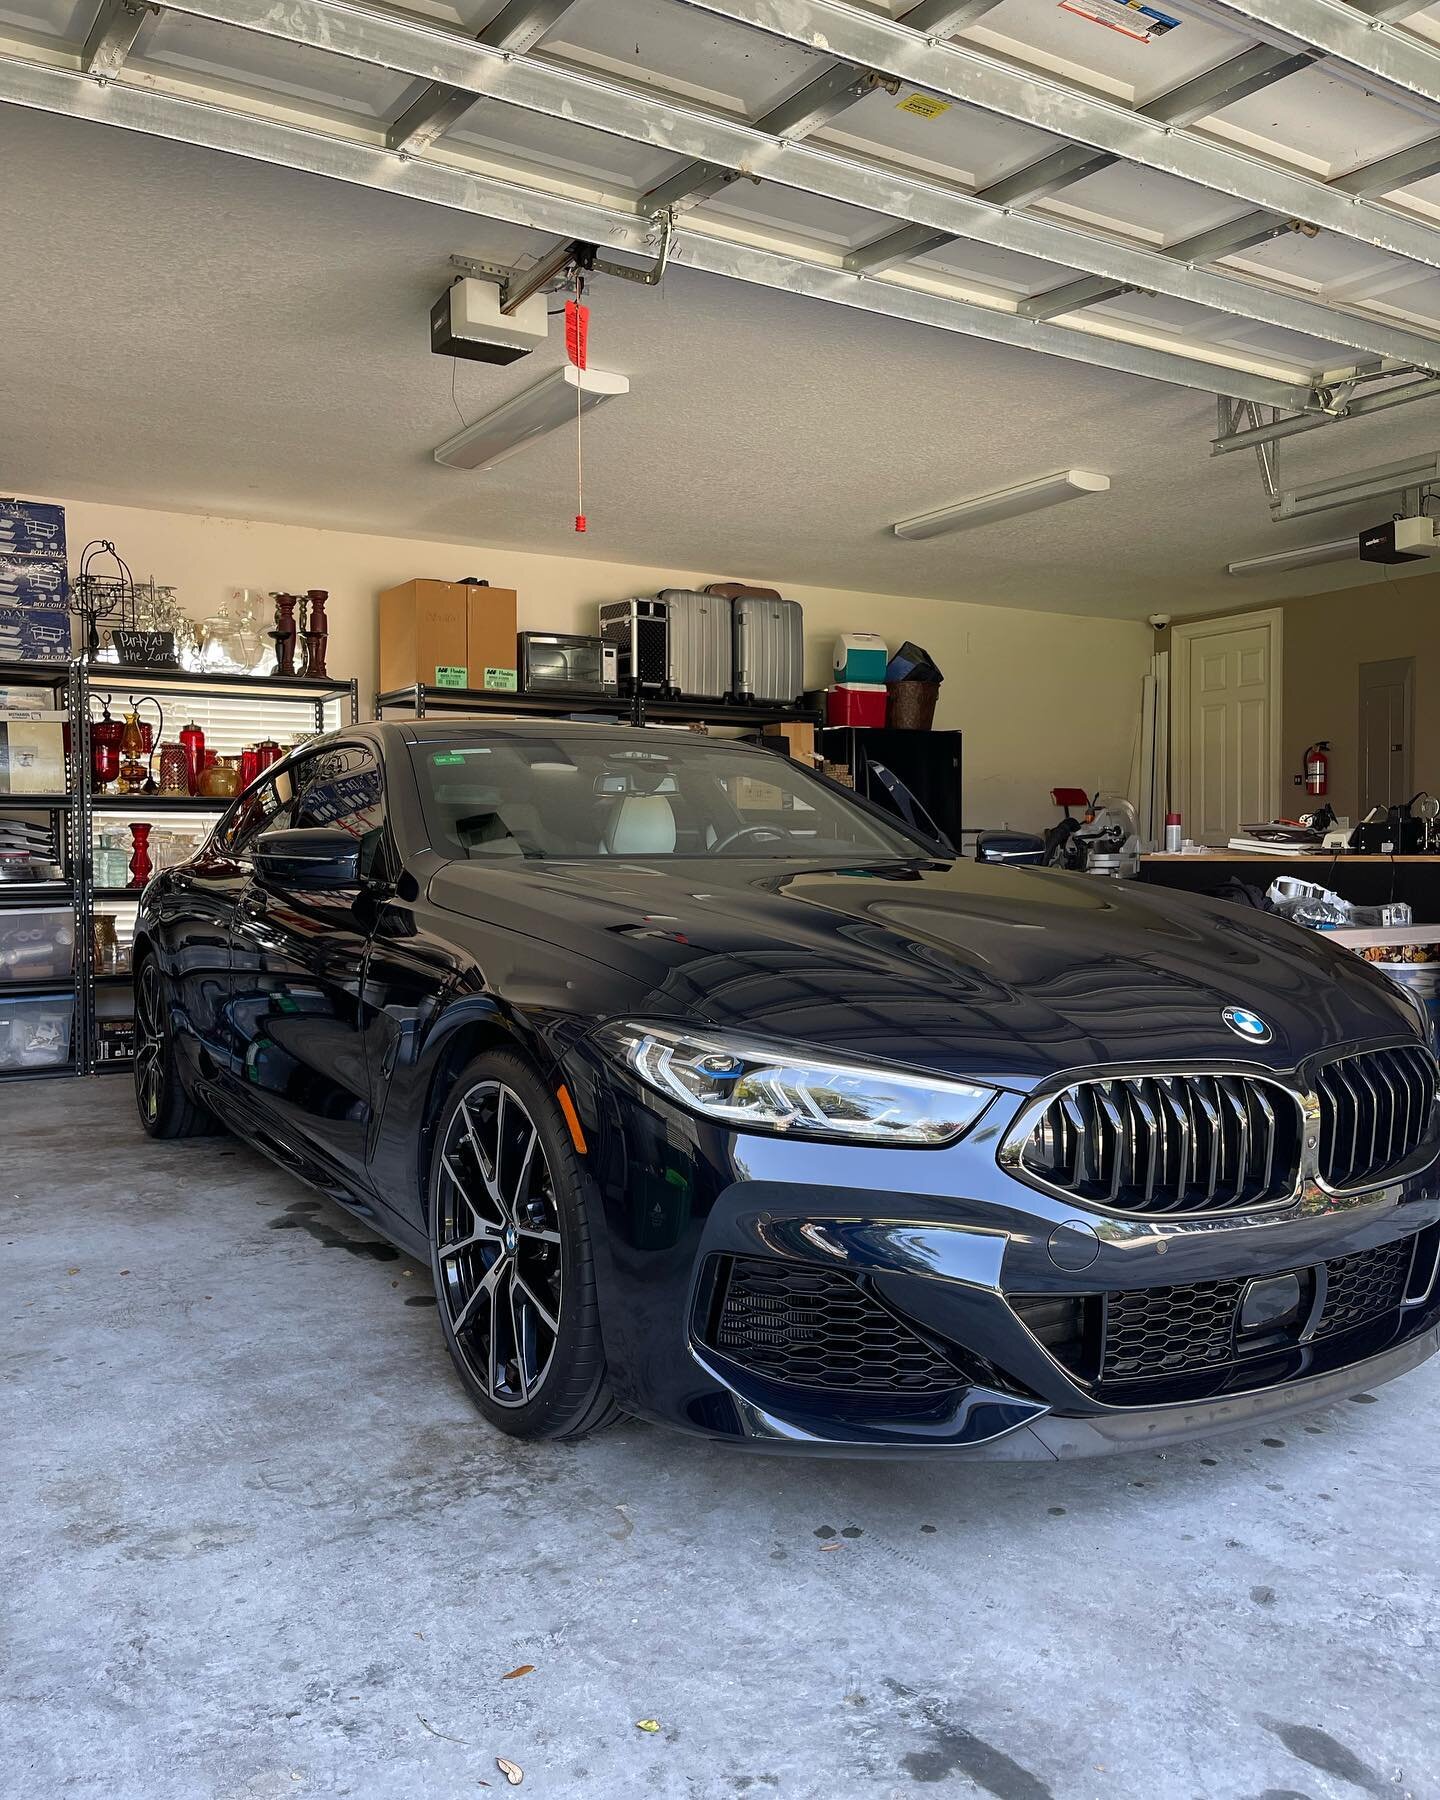 💎Monthly Maintenance on this BMW 850 M series 💎If you&rsquo;re looking to keep your vehicle maintained and in prestige condition, please shoot us a message to schedule an appointment.